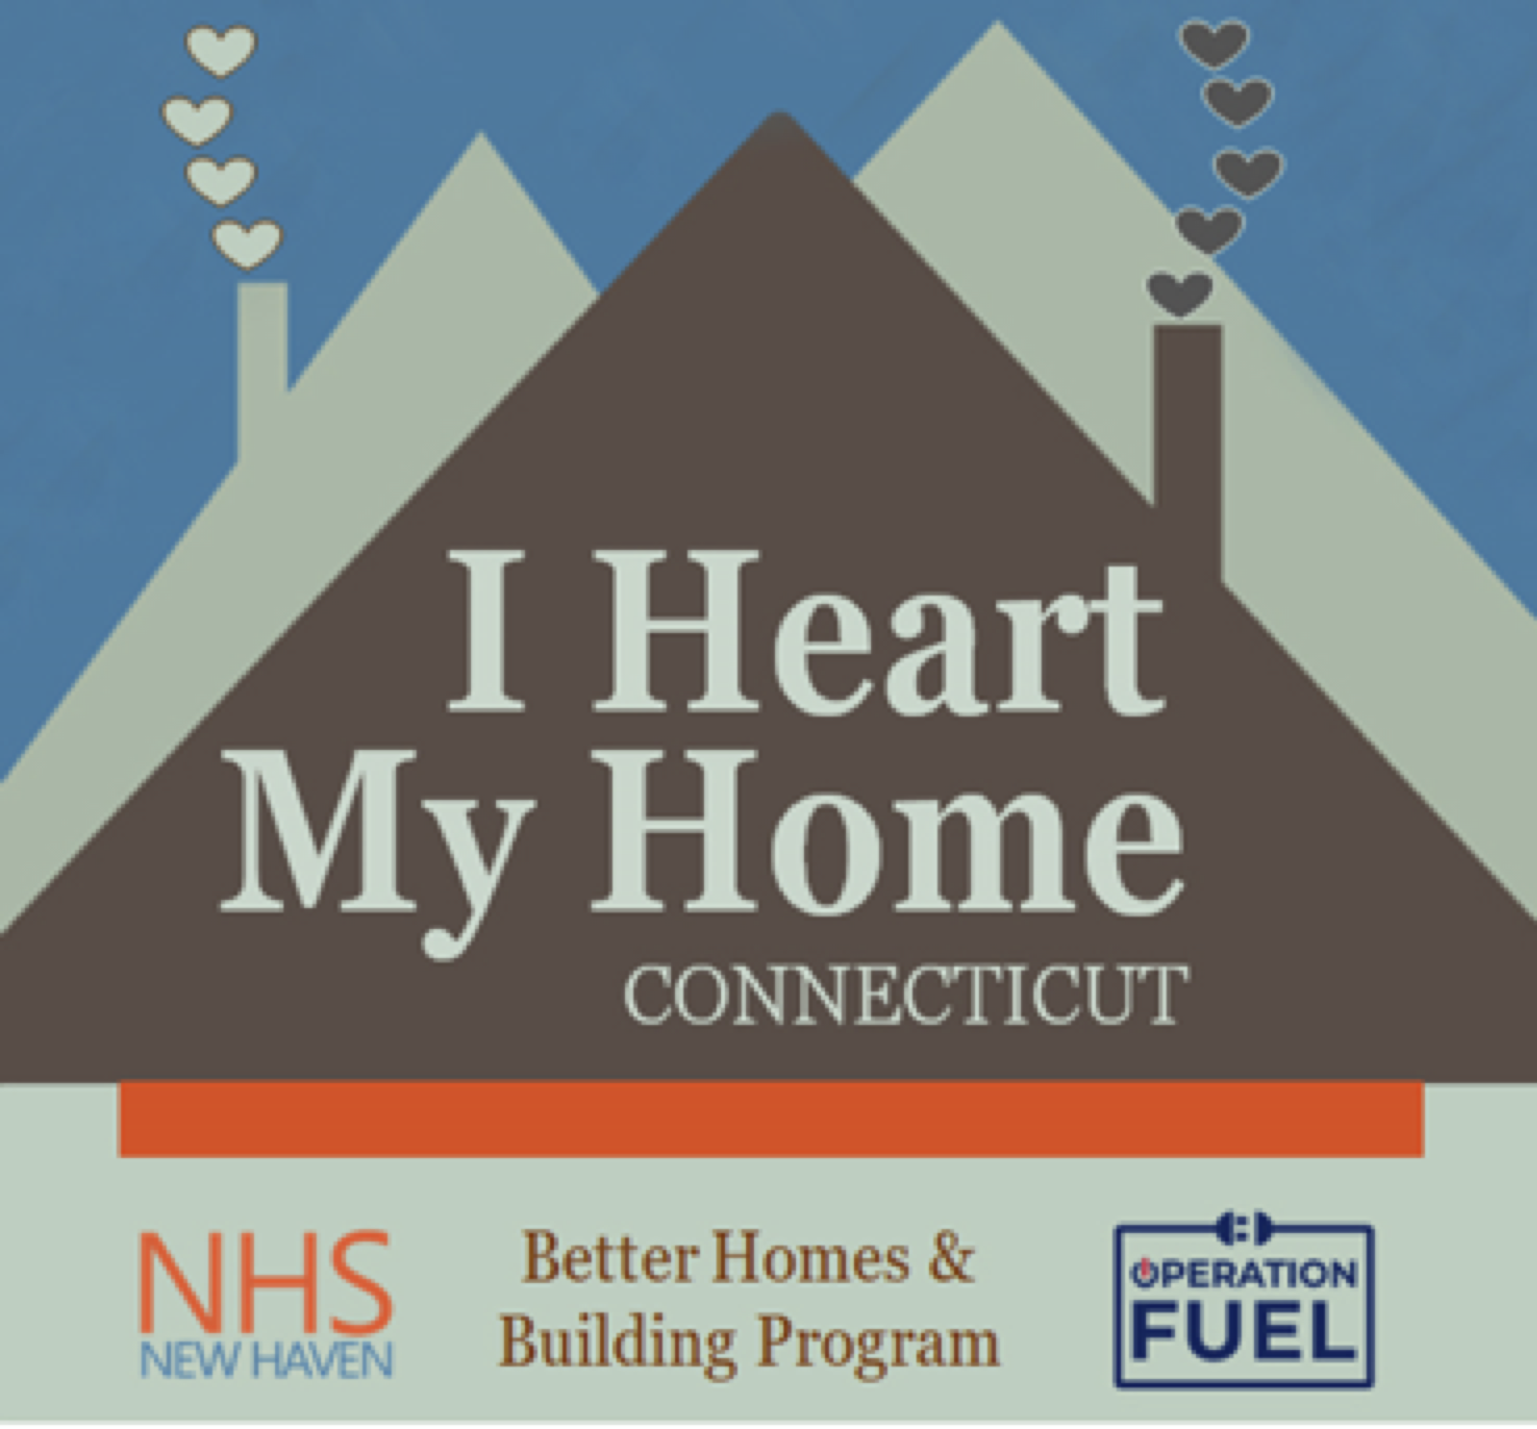 NHS of New Haven I Heart My Home CT and Operation Fuel